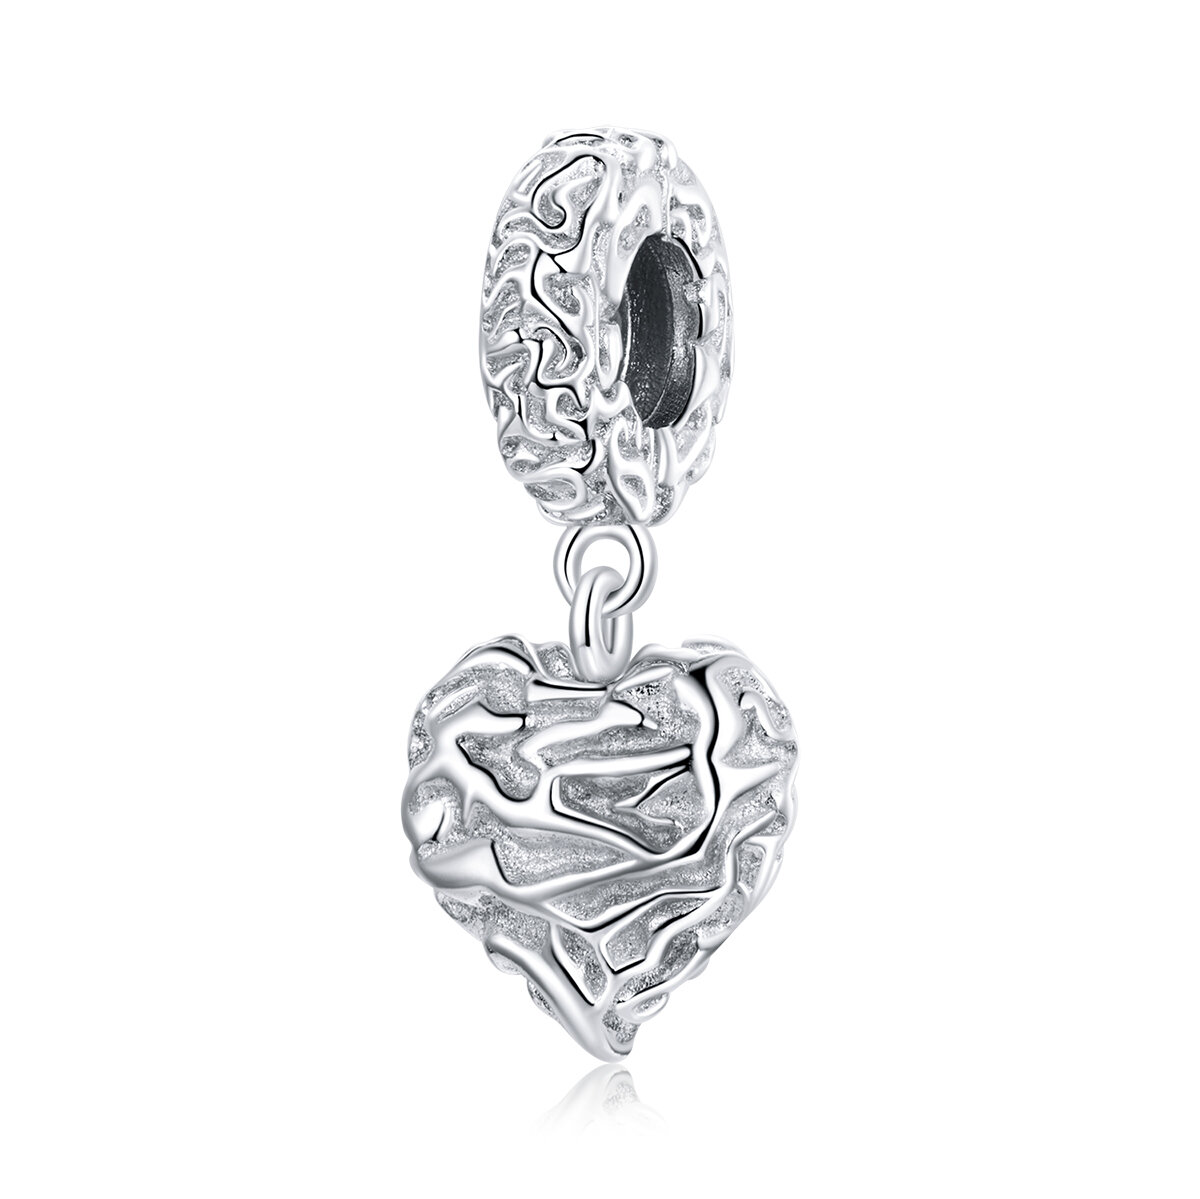 GemKing BSC437 Love beads S925 Sterling Silver Charm